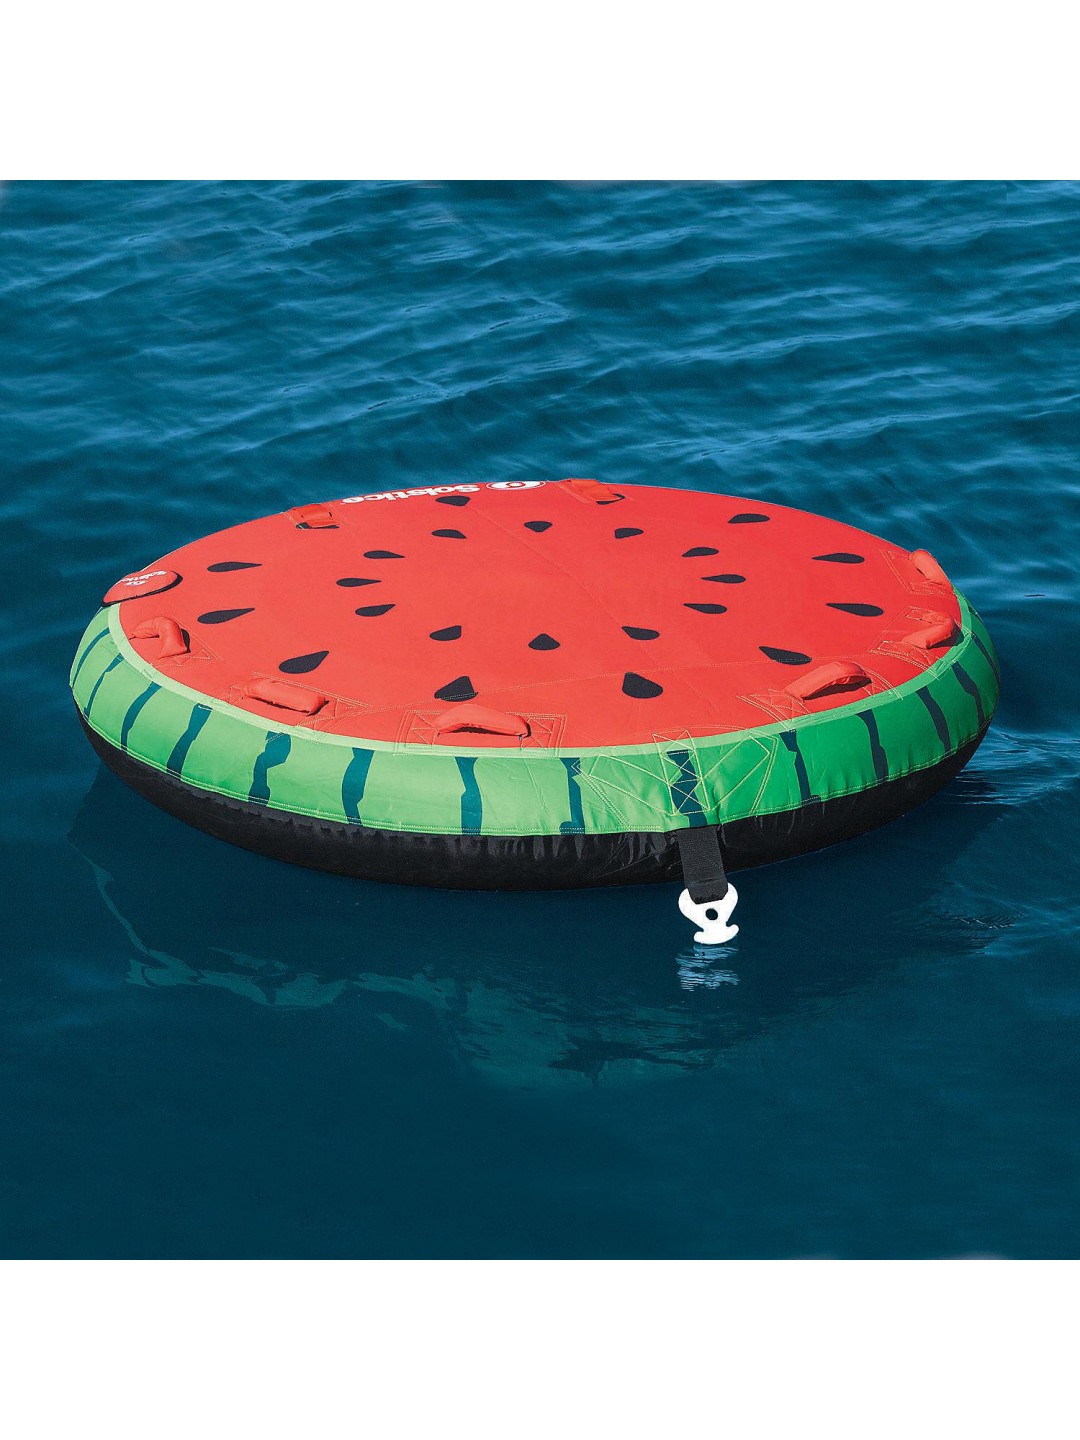 Watermelon Pool Float Towable for Summer - Toys - Inflates - Misc Inflates - Summer - 1 Piece